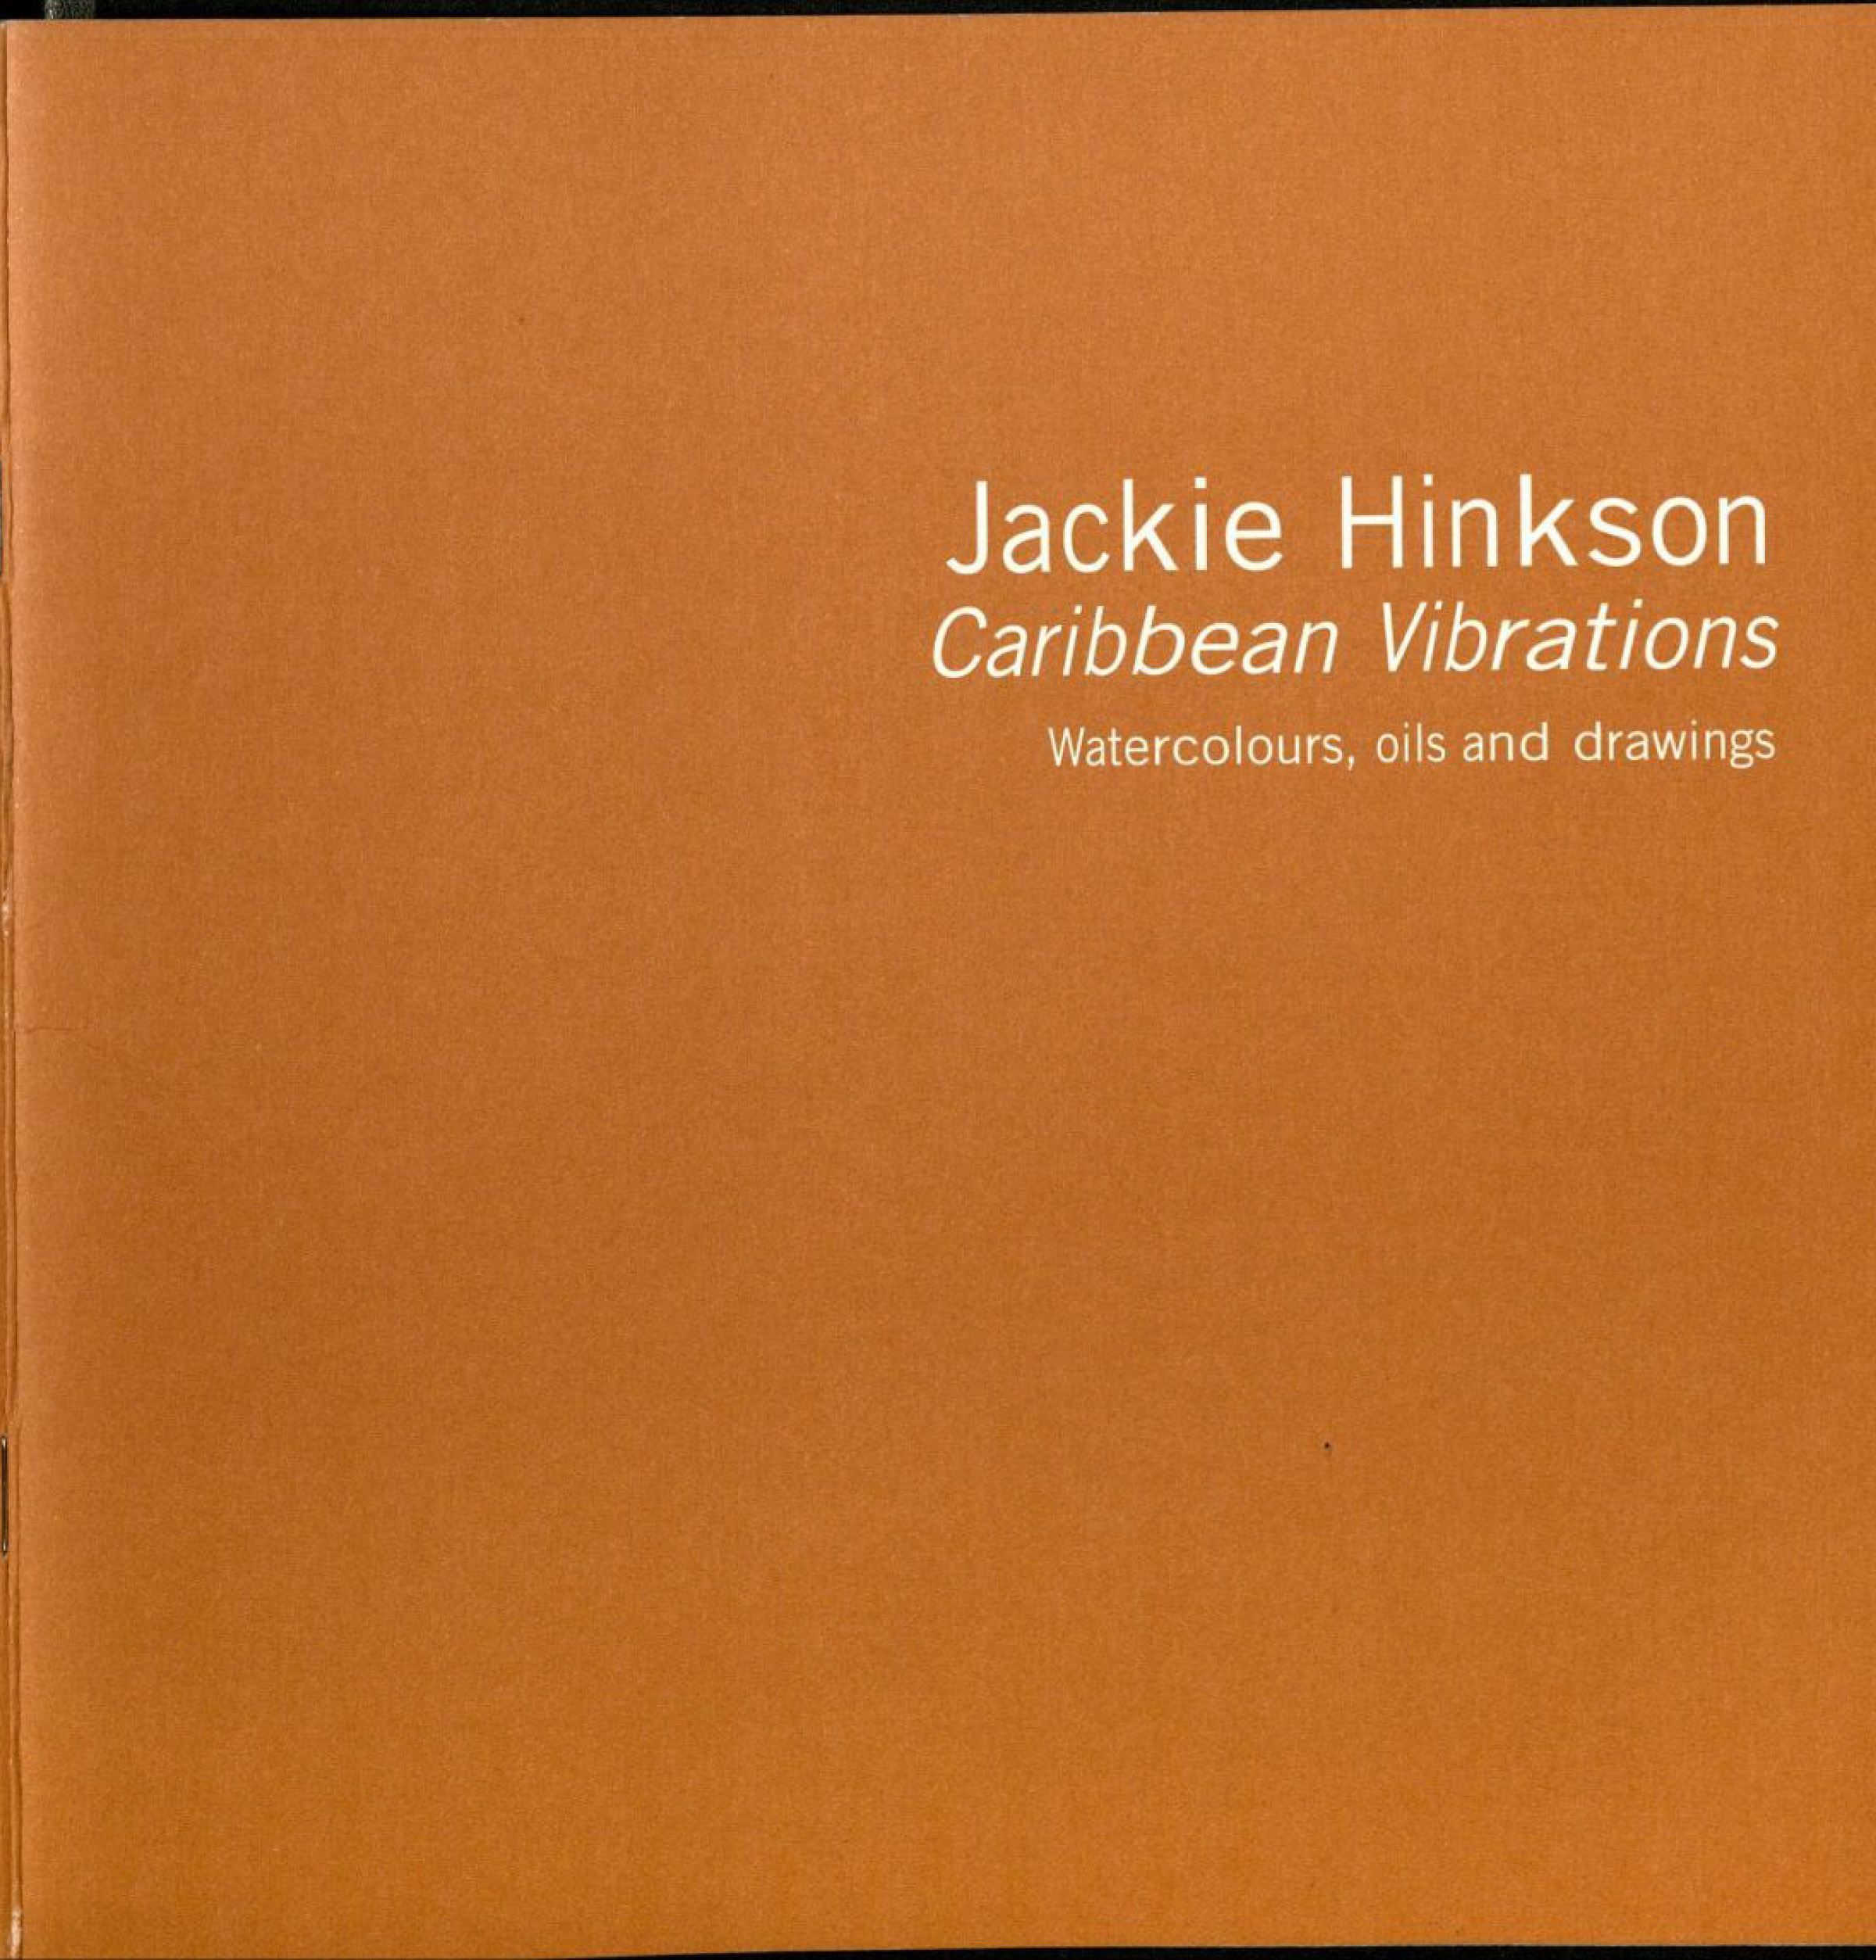 Jackie Hinkson Carribean Vibrations Watercolours, oils, and drawings - 1999 Cover